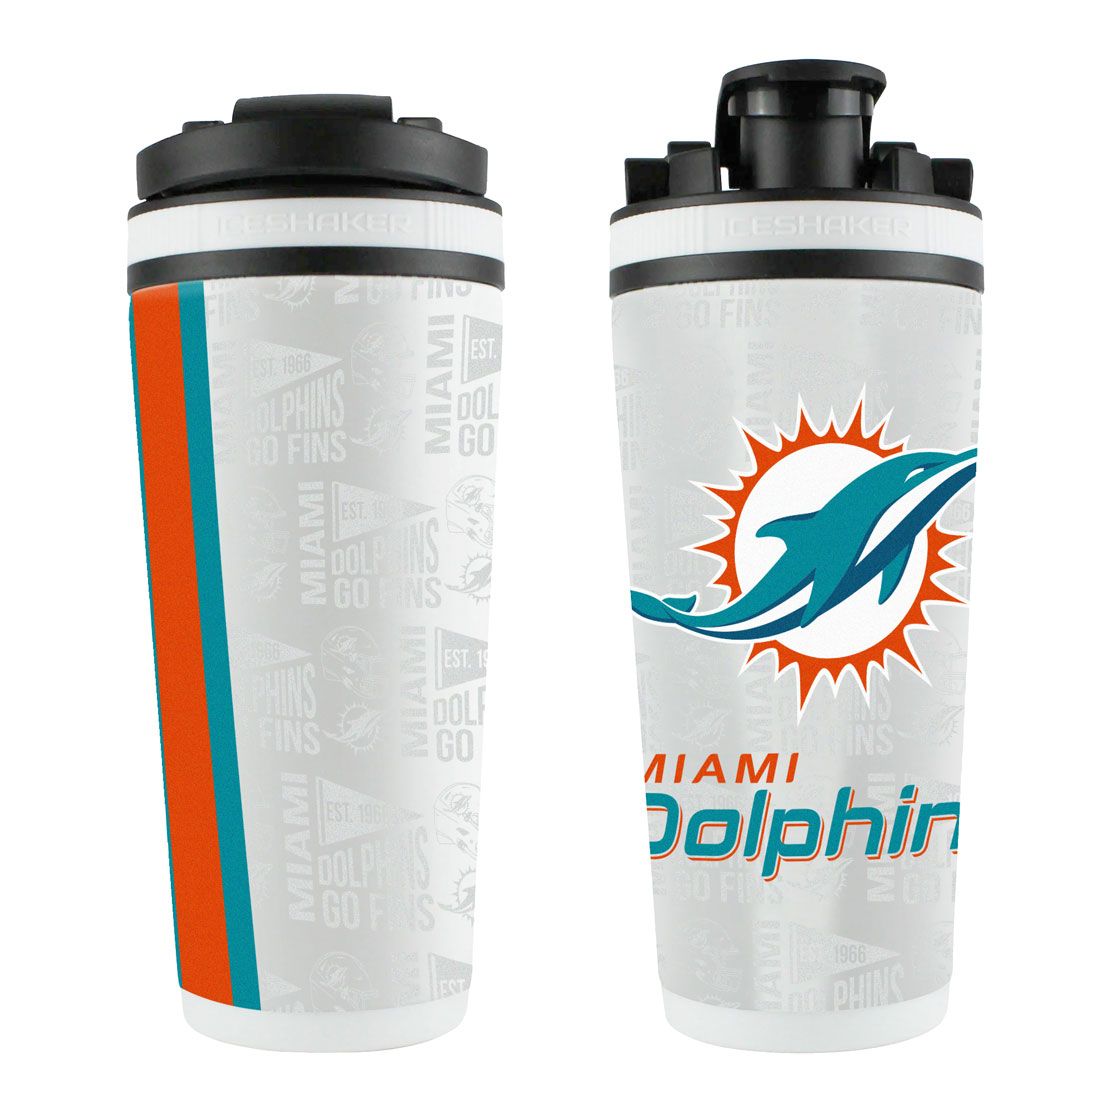 NFL Miami Dolphins Ice Shaker 26oz 4D Elements Stainless Steel Ice Shaker